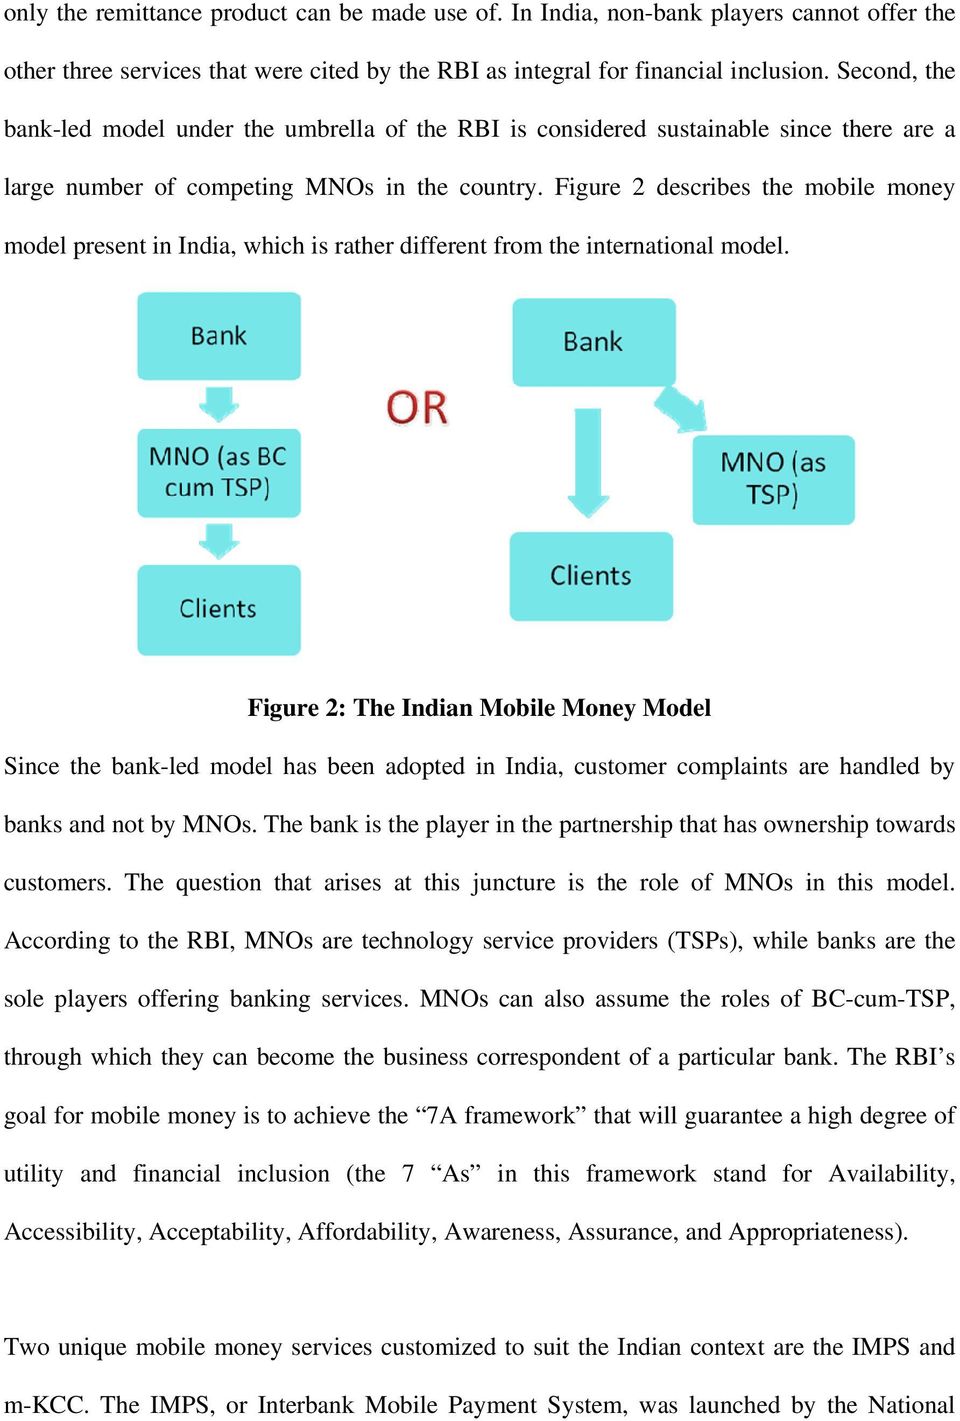 Figure 2 describes the mobile money model present in India, which is rather different from the international model.